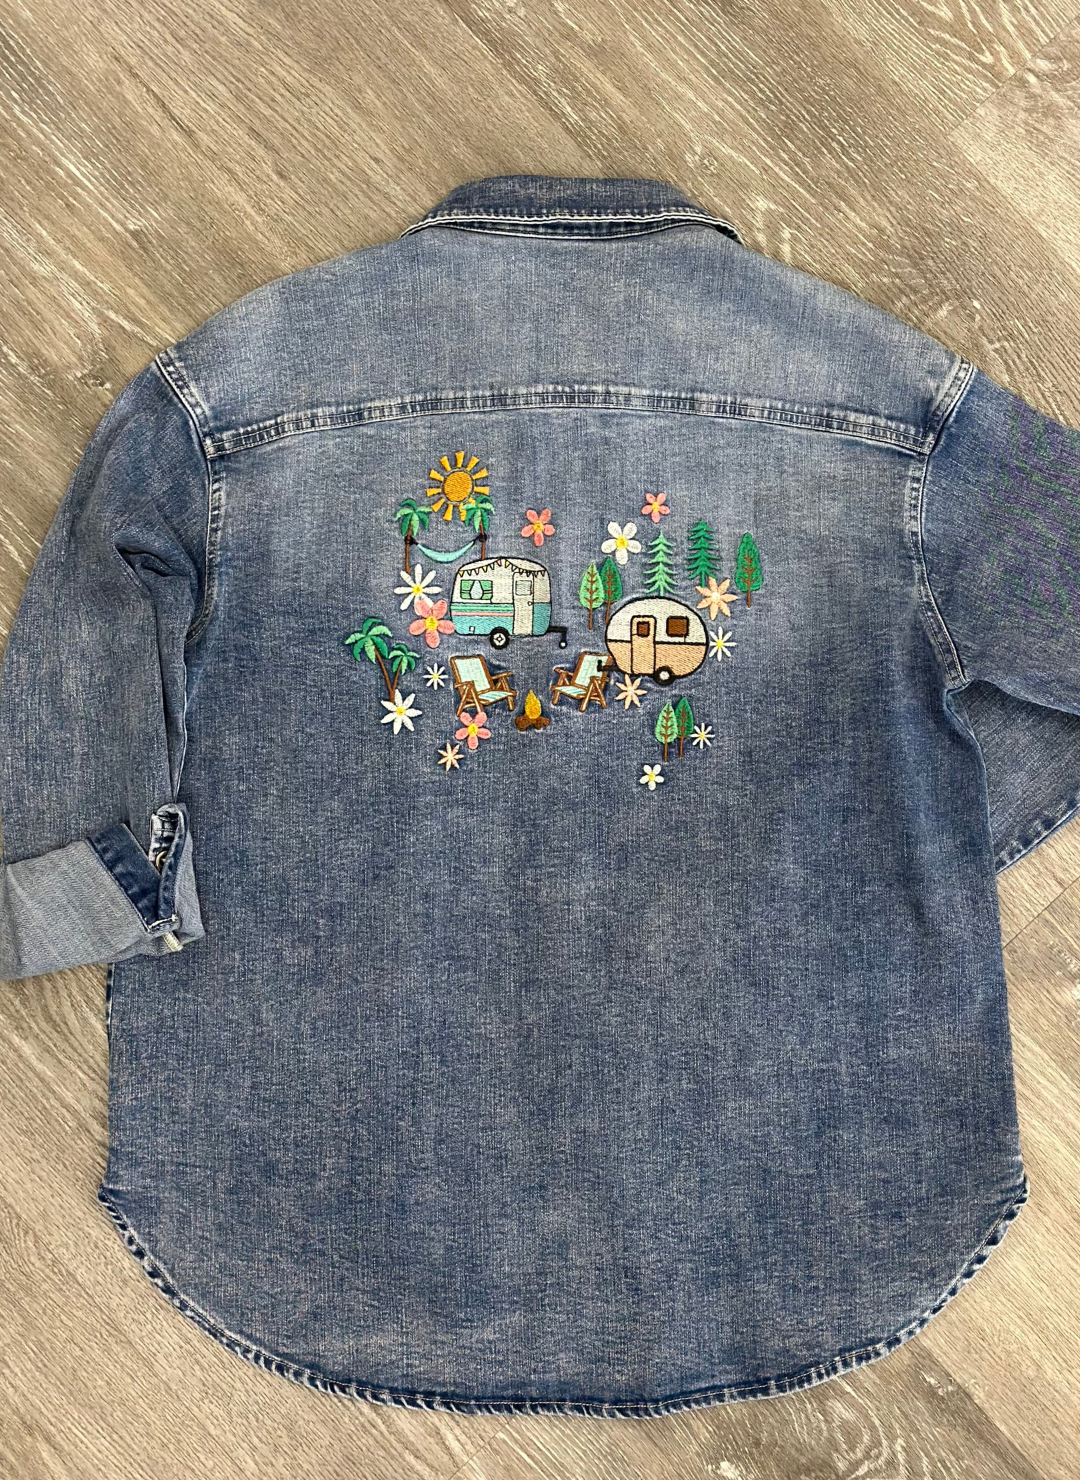 Back flat view of denim camper shirt with embroidered trailers, campfire, trees, sun, hammock, and flowers